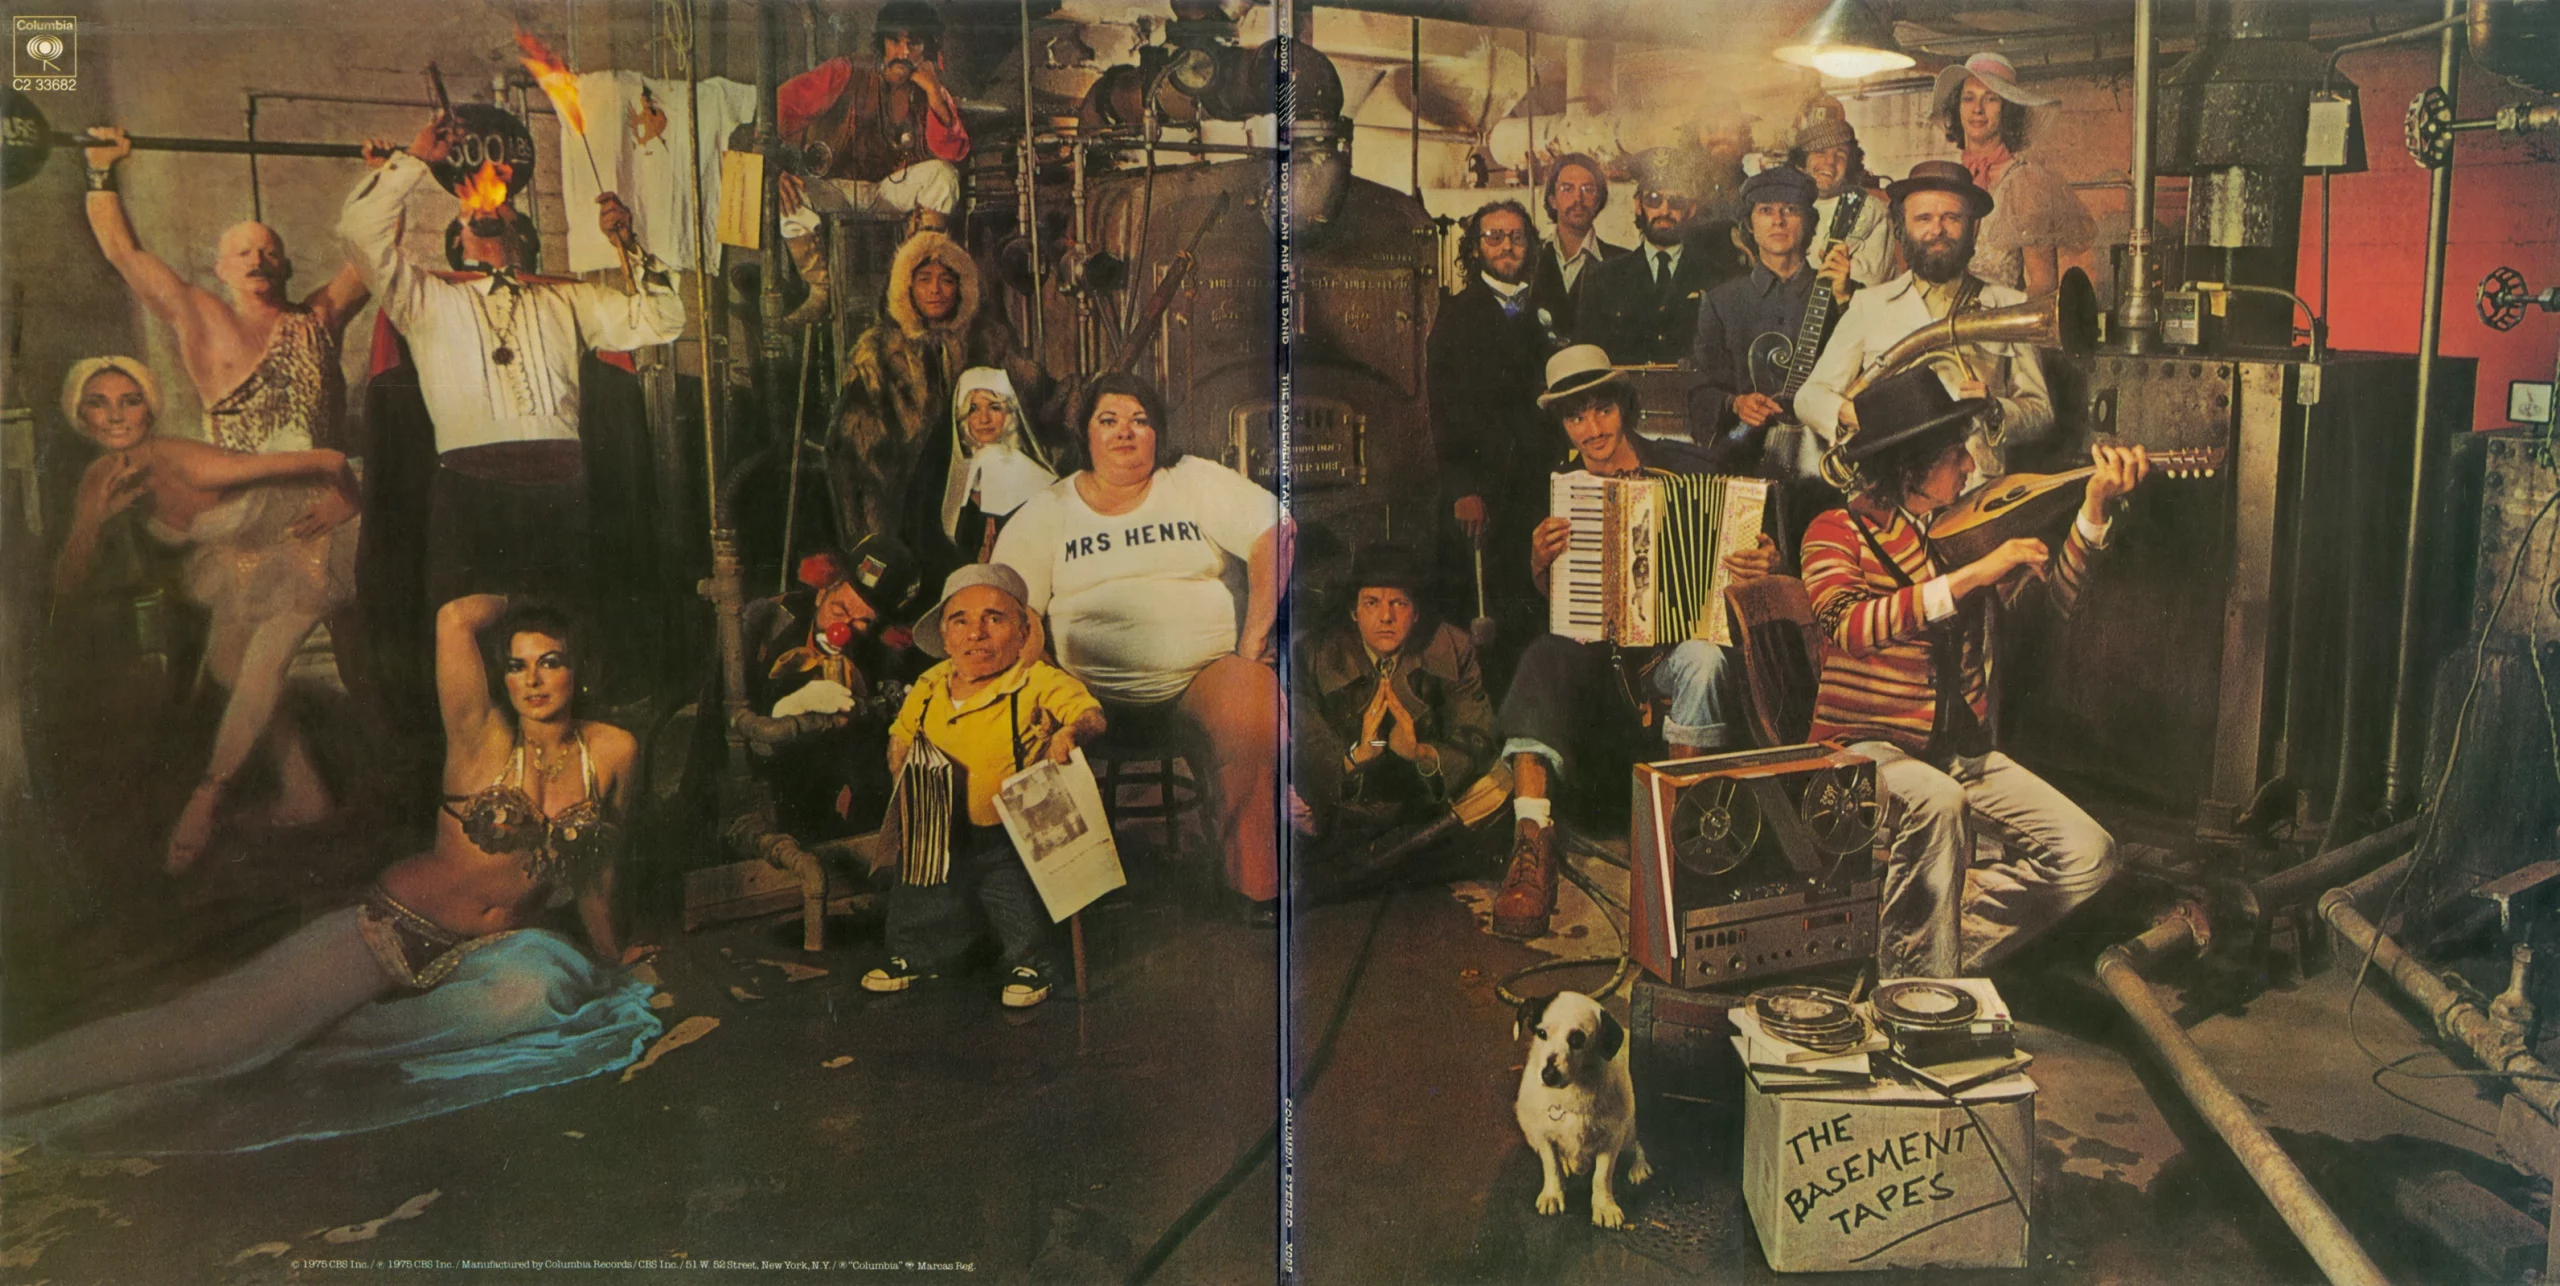 The Basement Tapes back cover